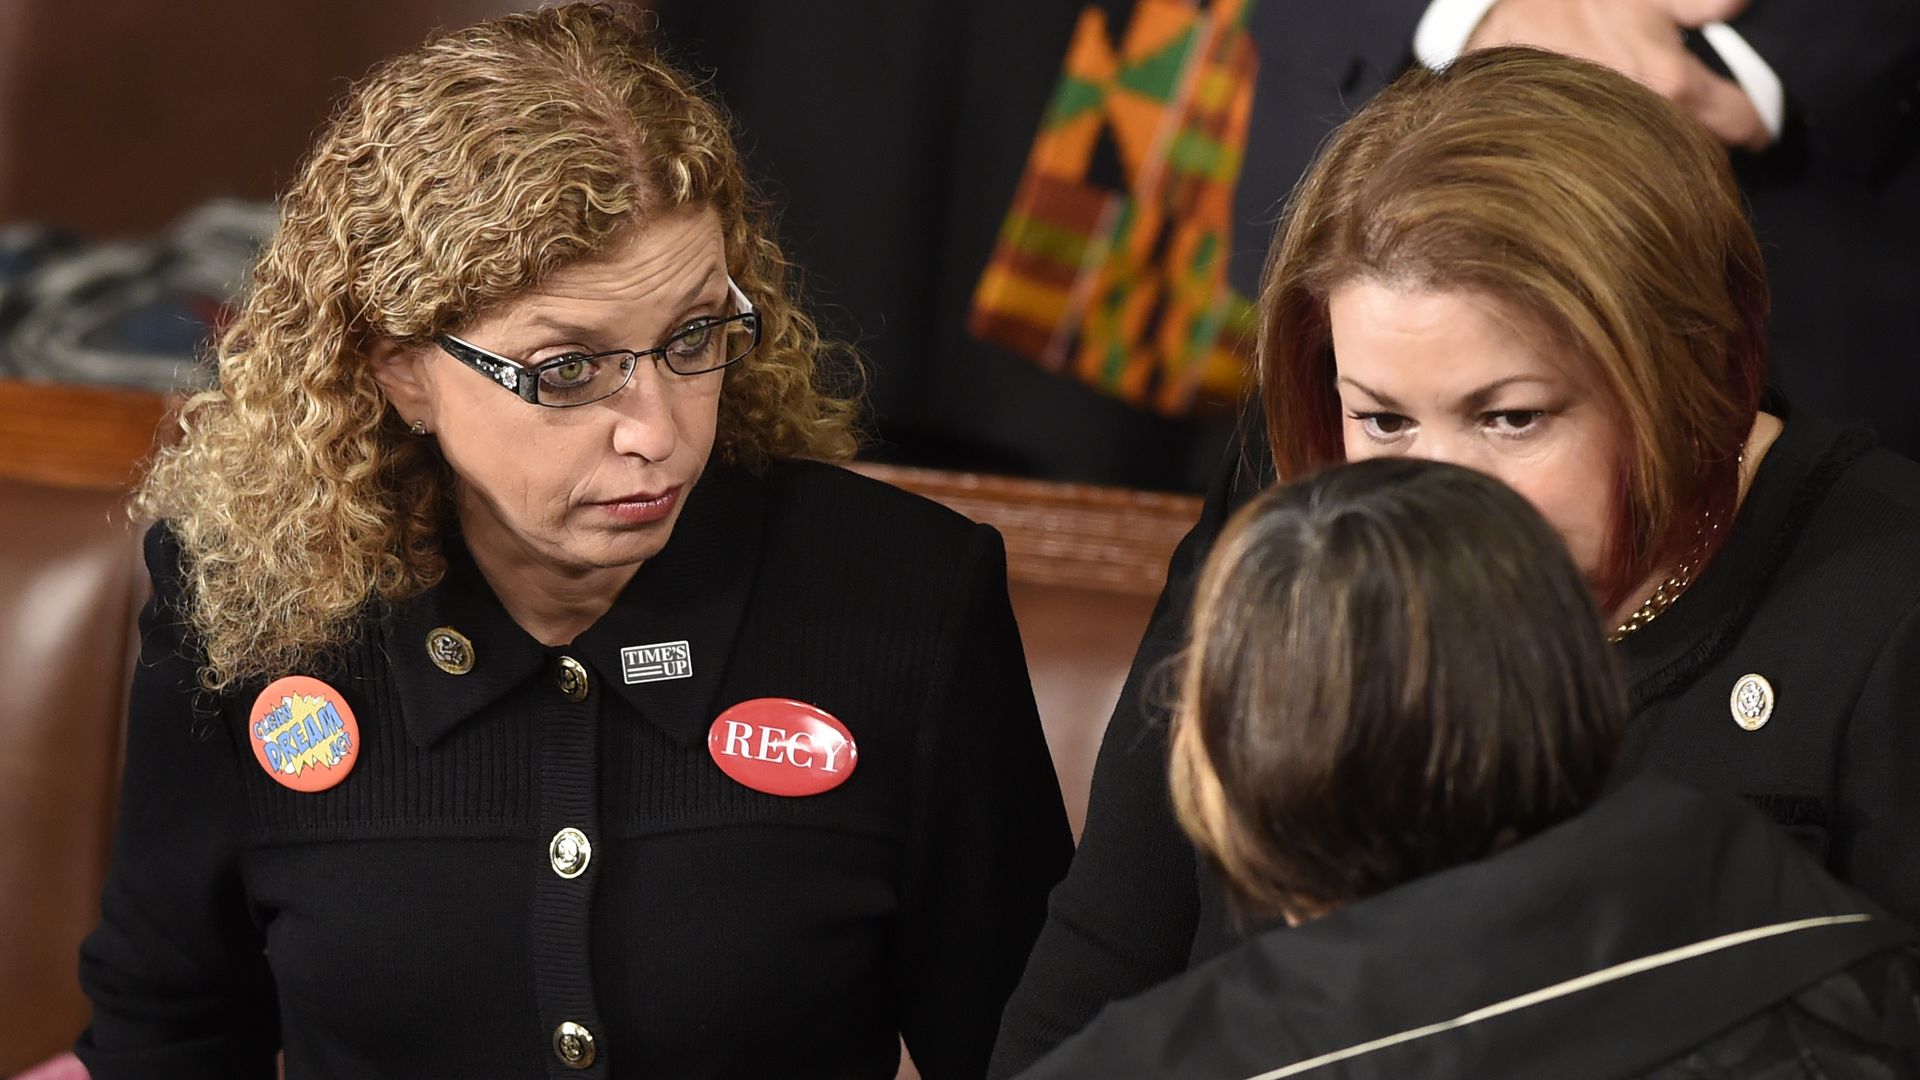 Rep. Debbie Wasserman Schultz in a black top and glasses with red pins